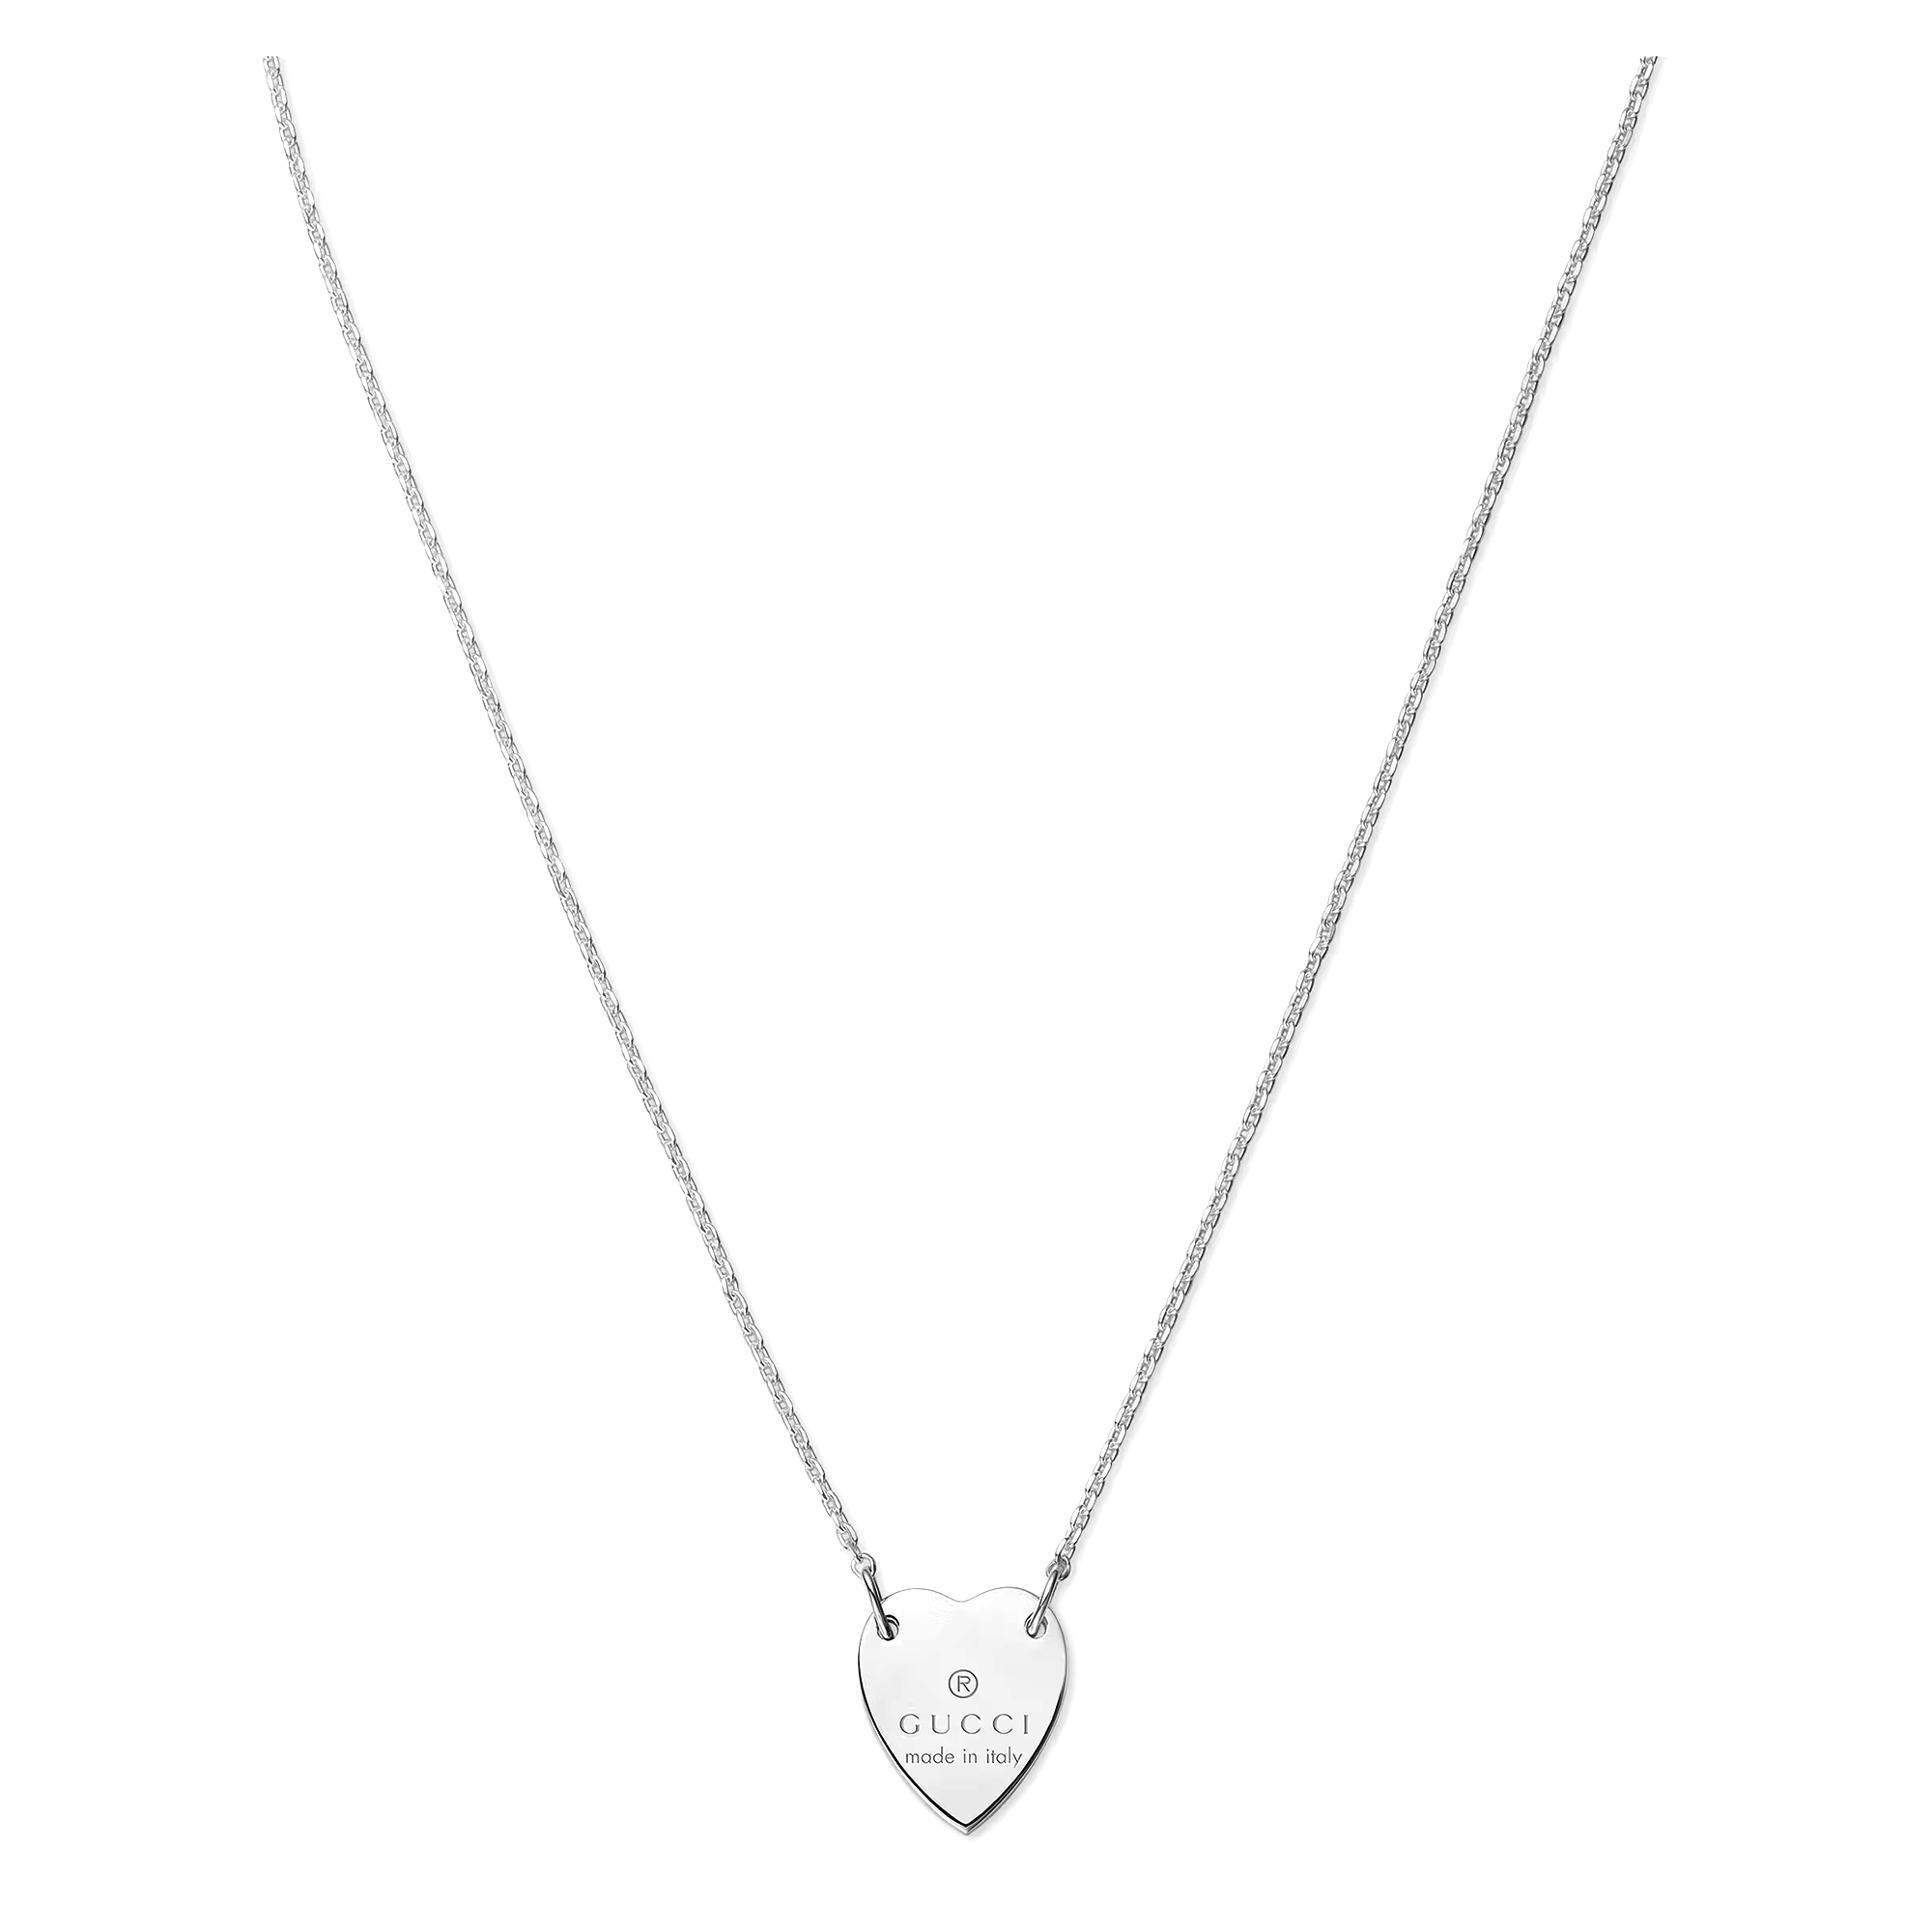 Trademark Sterling Silver Necklace With Heart Motif